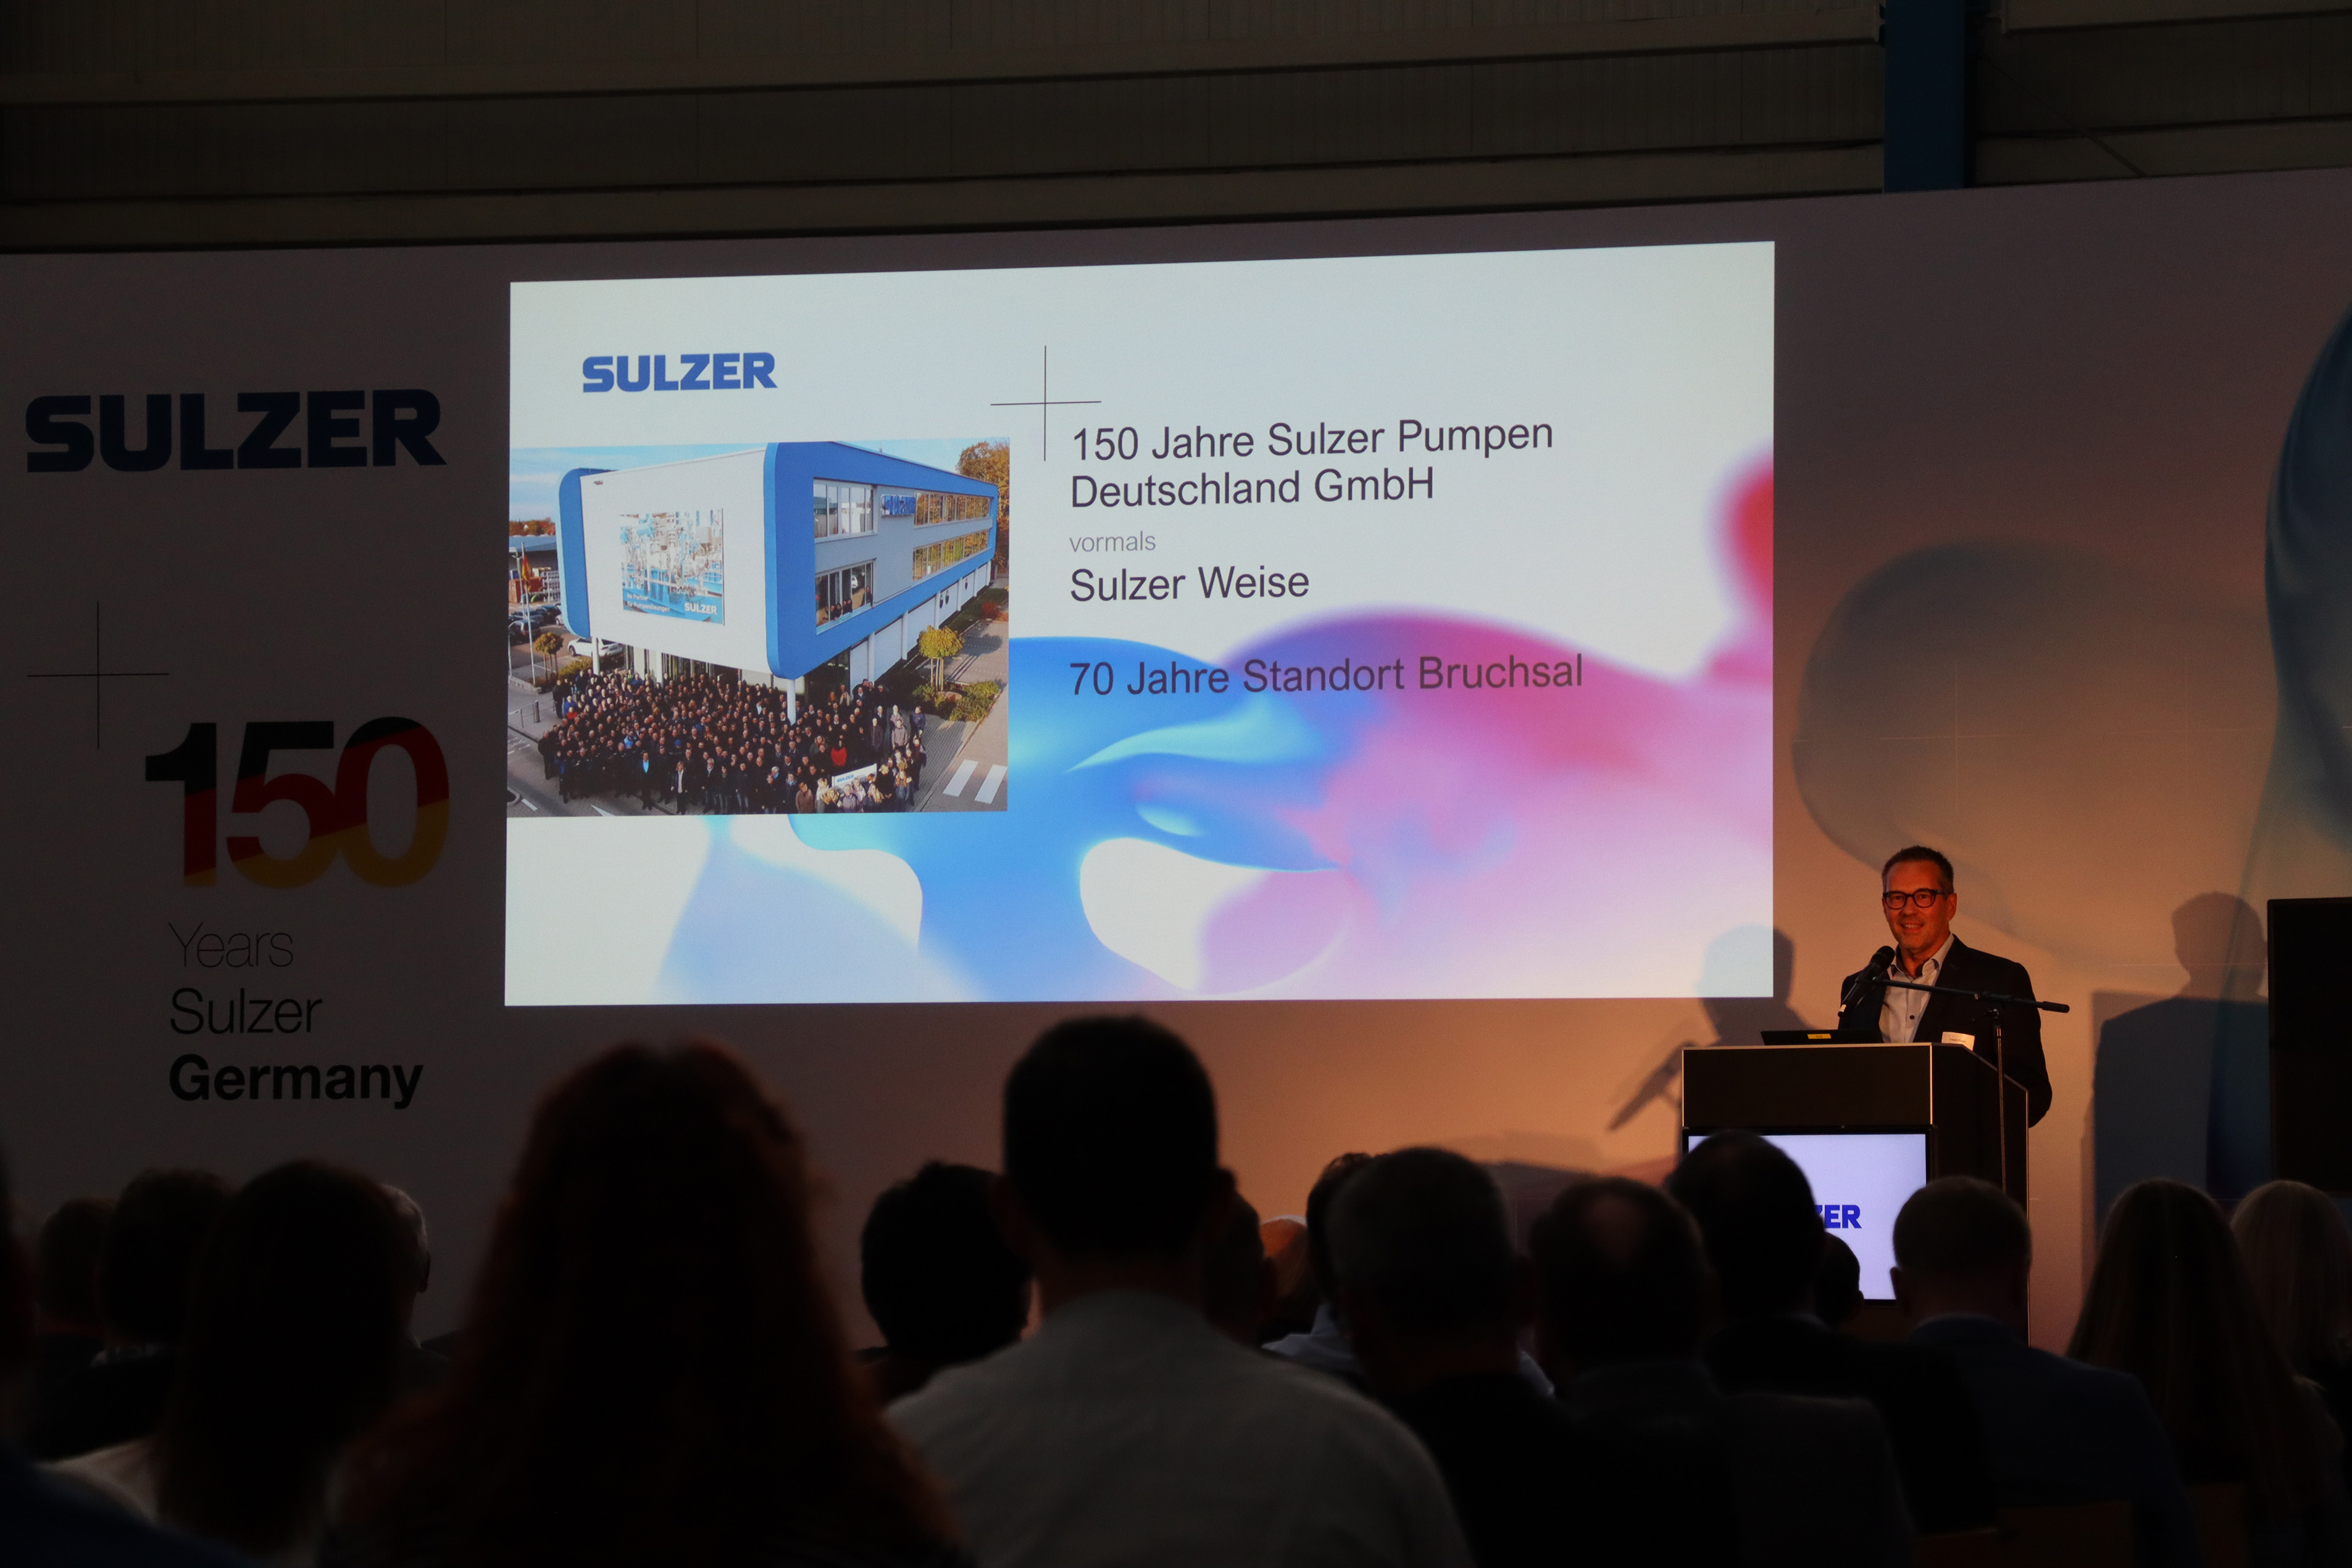 David Pistor, Managing Director at Sulzer Pumpen GmbH, gave a presentation to local dignitaries and colleagues